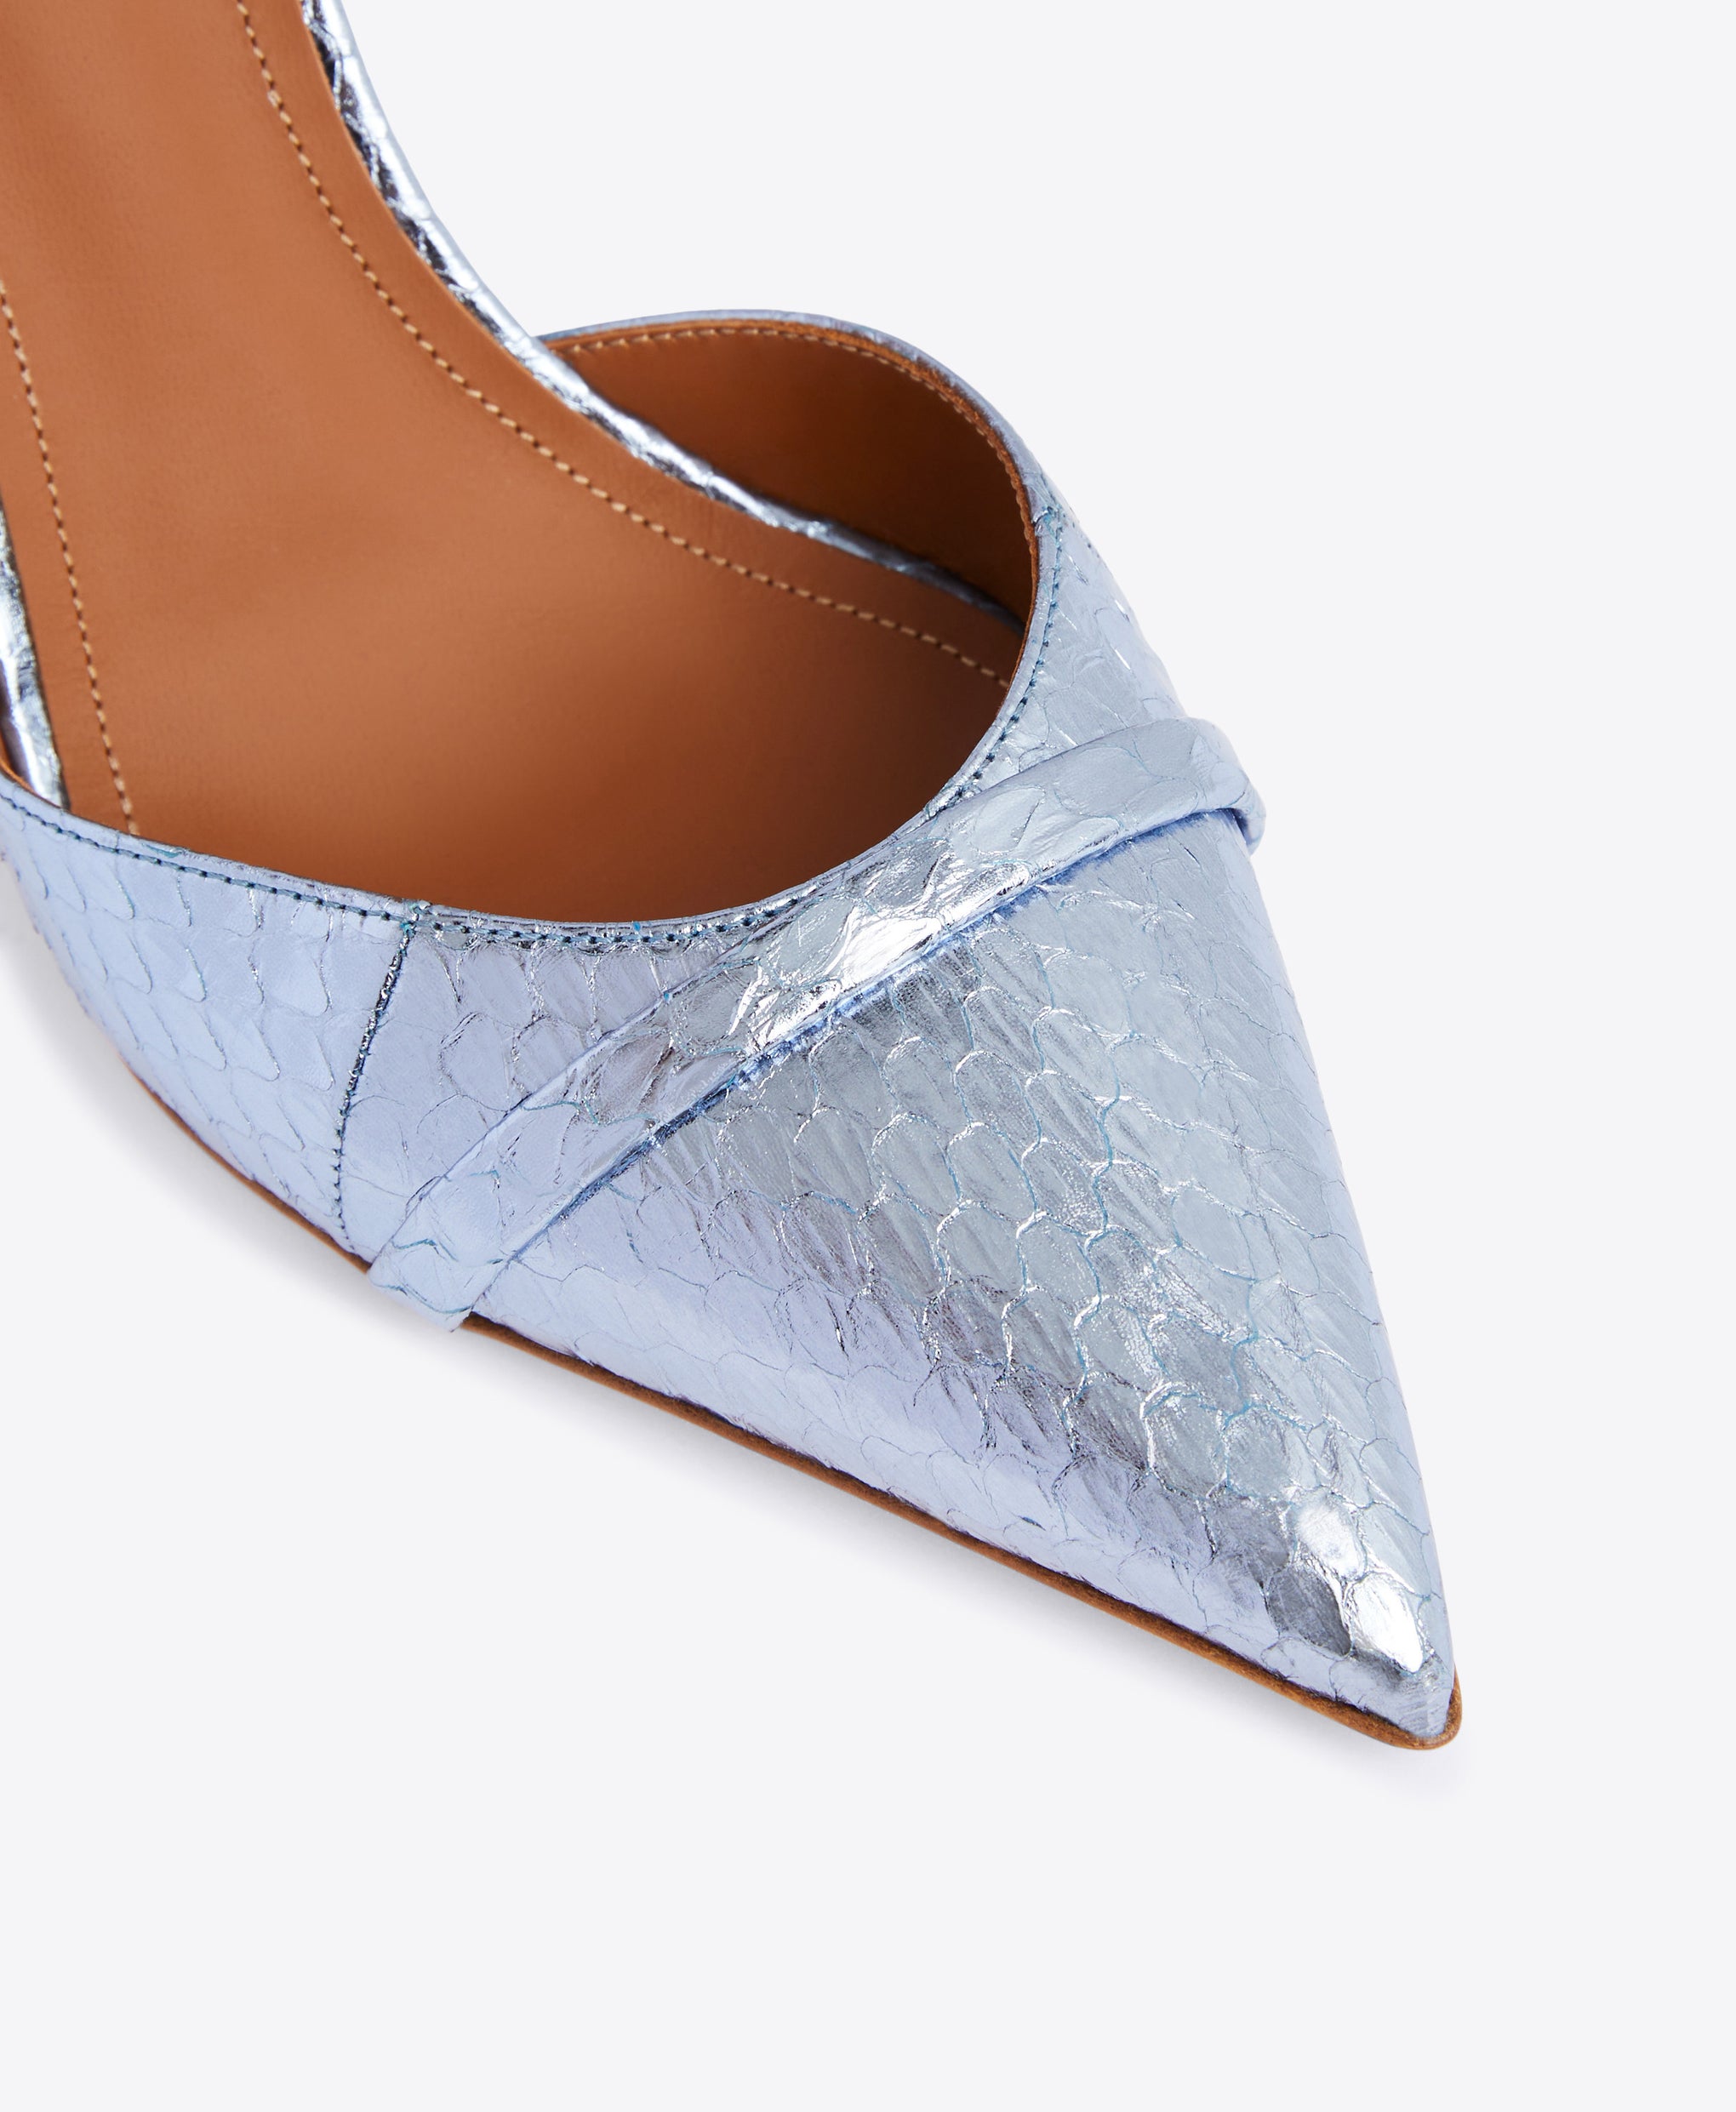 Double Strap Mules in Steel Blue - Pointed Toe on Flared Stiletto | Malone Souliers